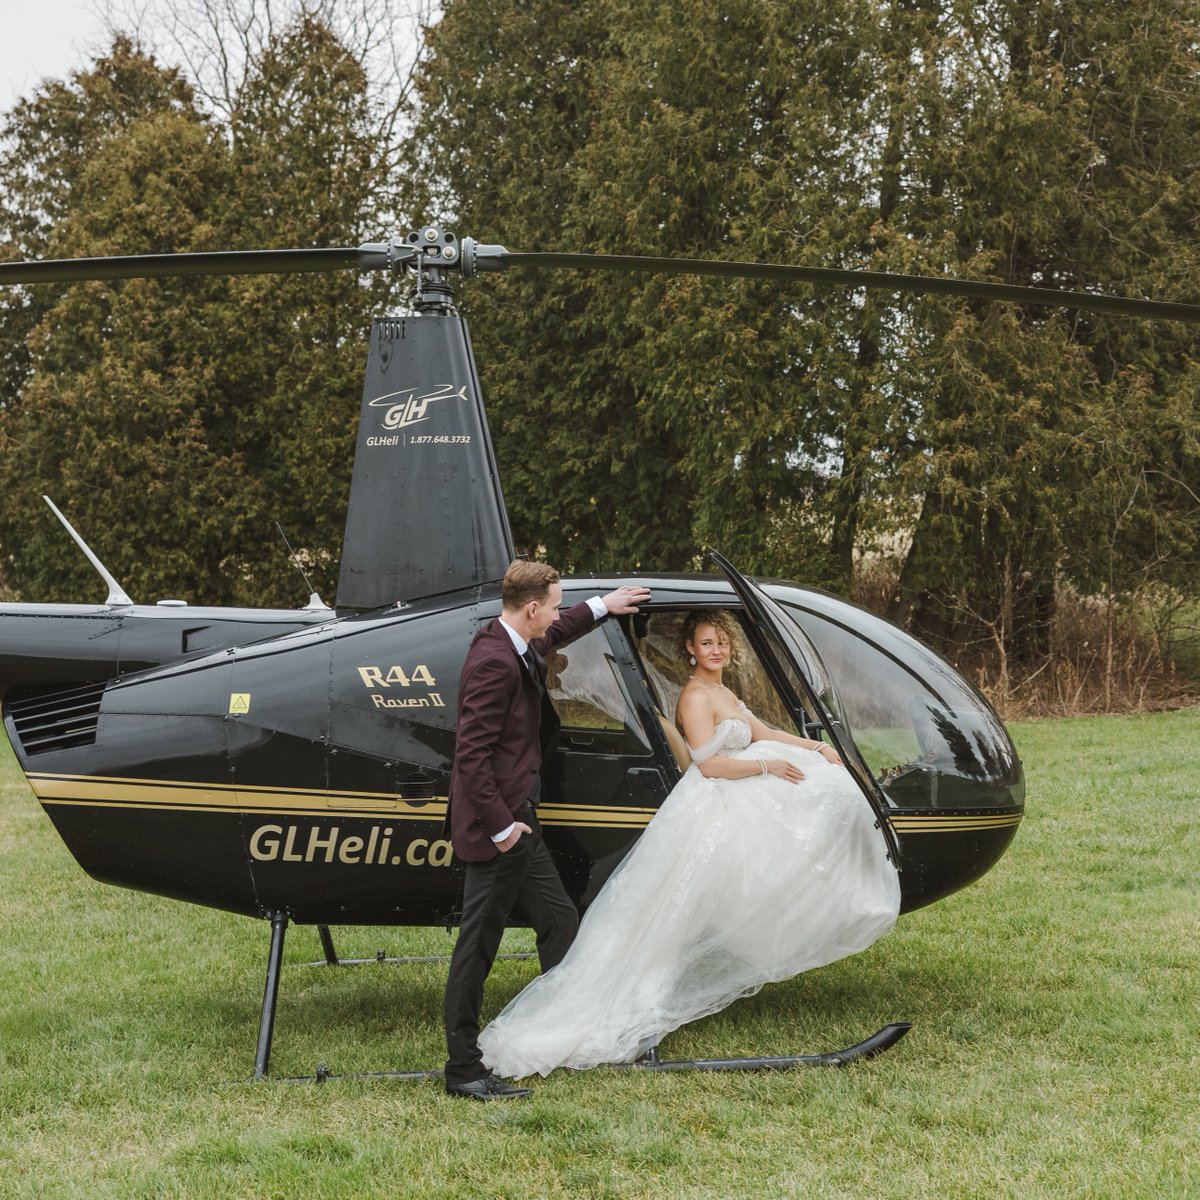 Getting married in 2024? Arriving in style looks a little different these days! 

@glheli
@theweddingring

#helirides #proposals #engagement #kwweddings